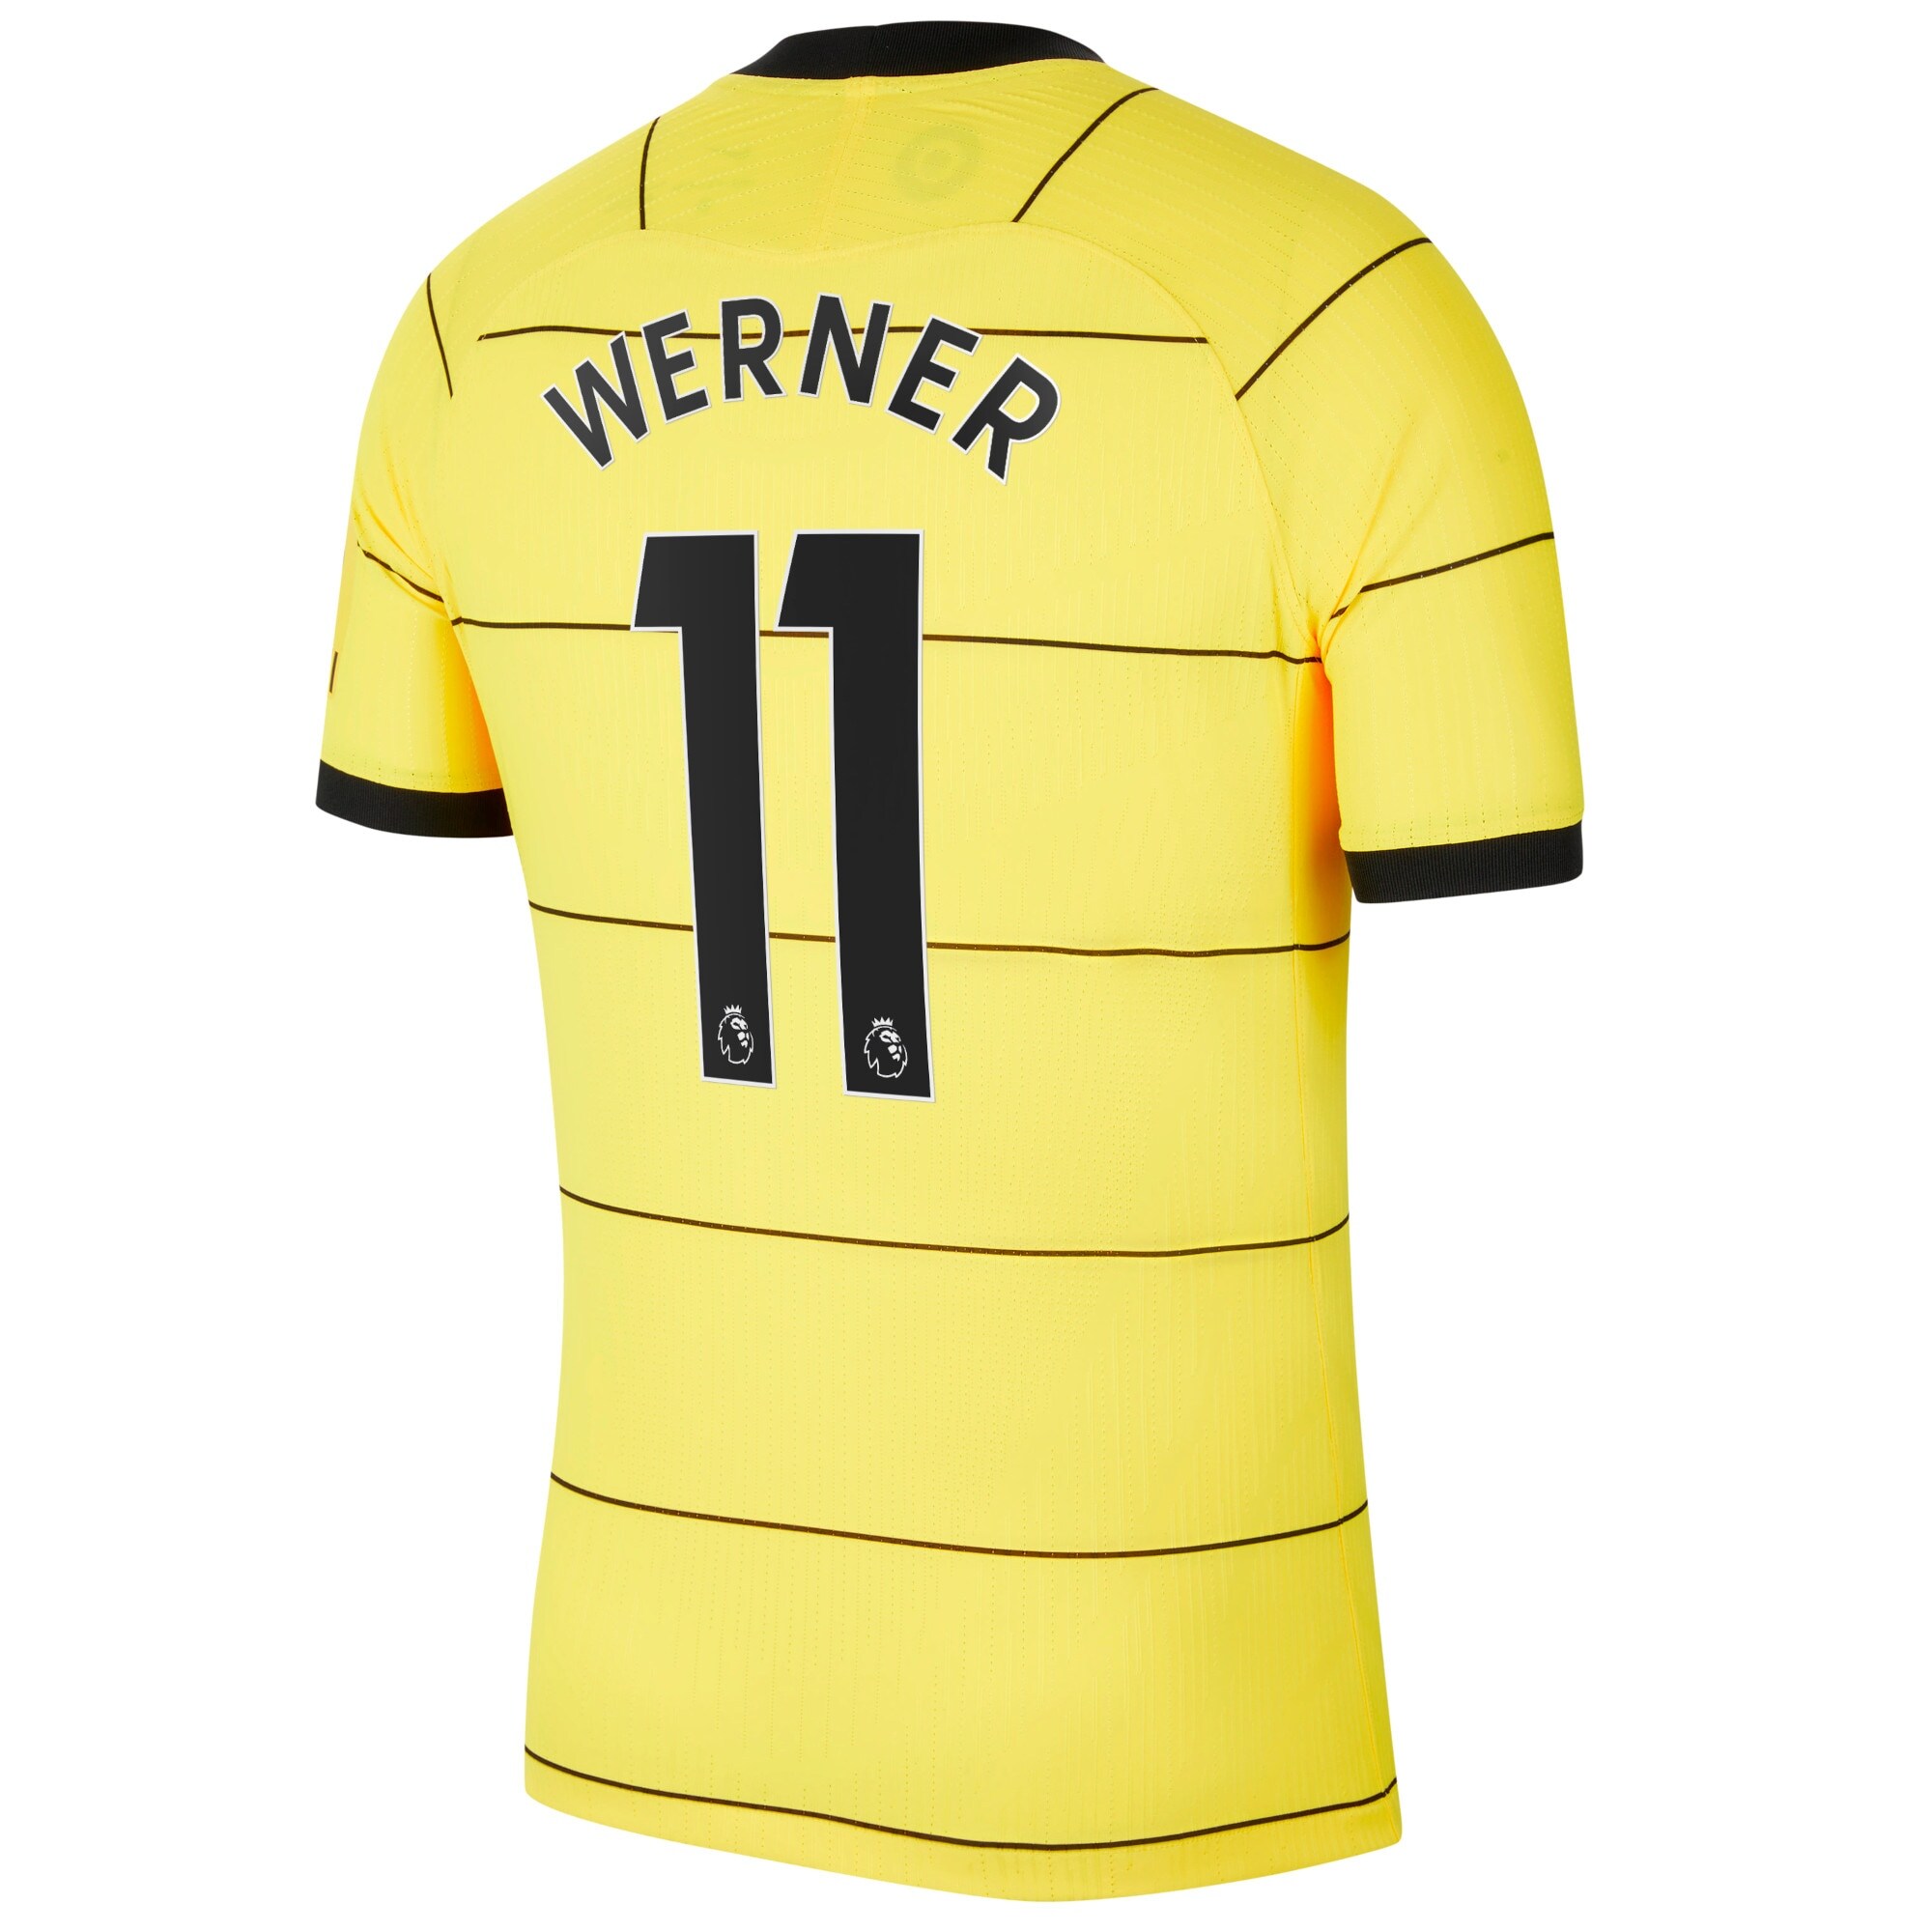 Chelsea Away Vapor Match Shirt 2021-22 with Werner 11 printing